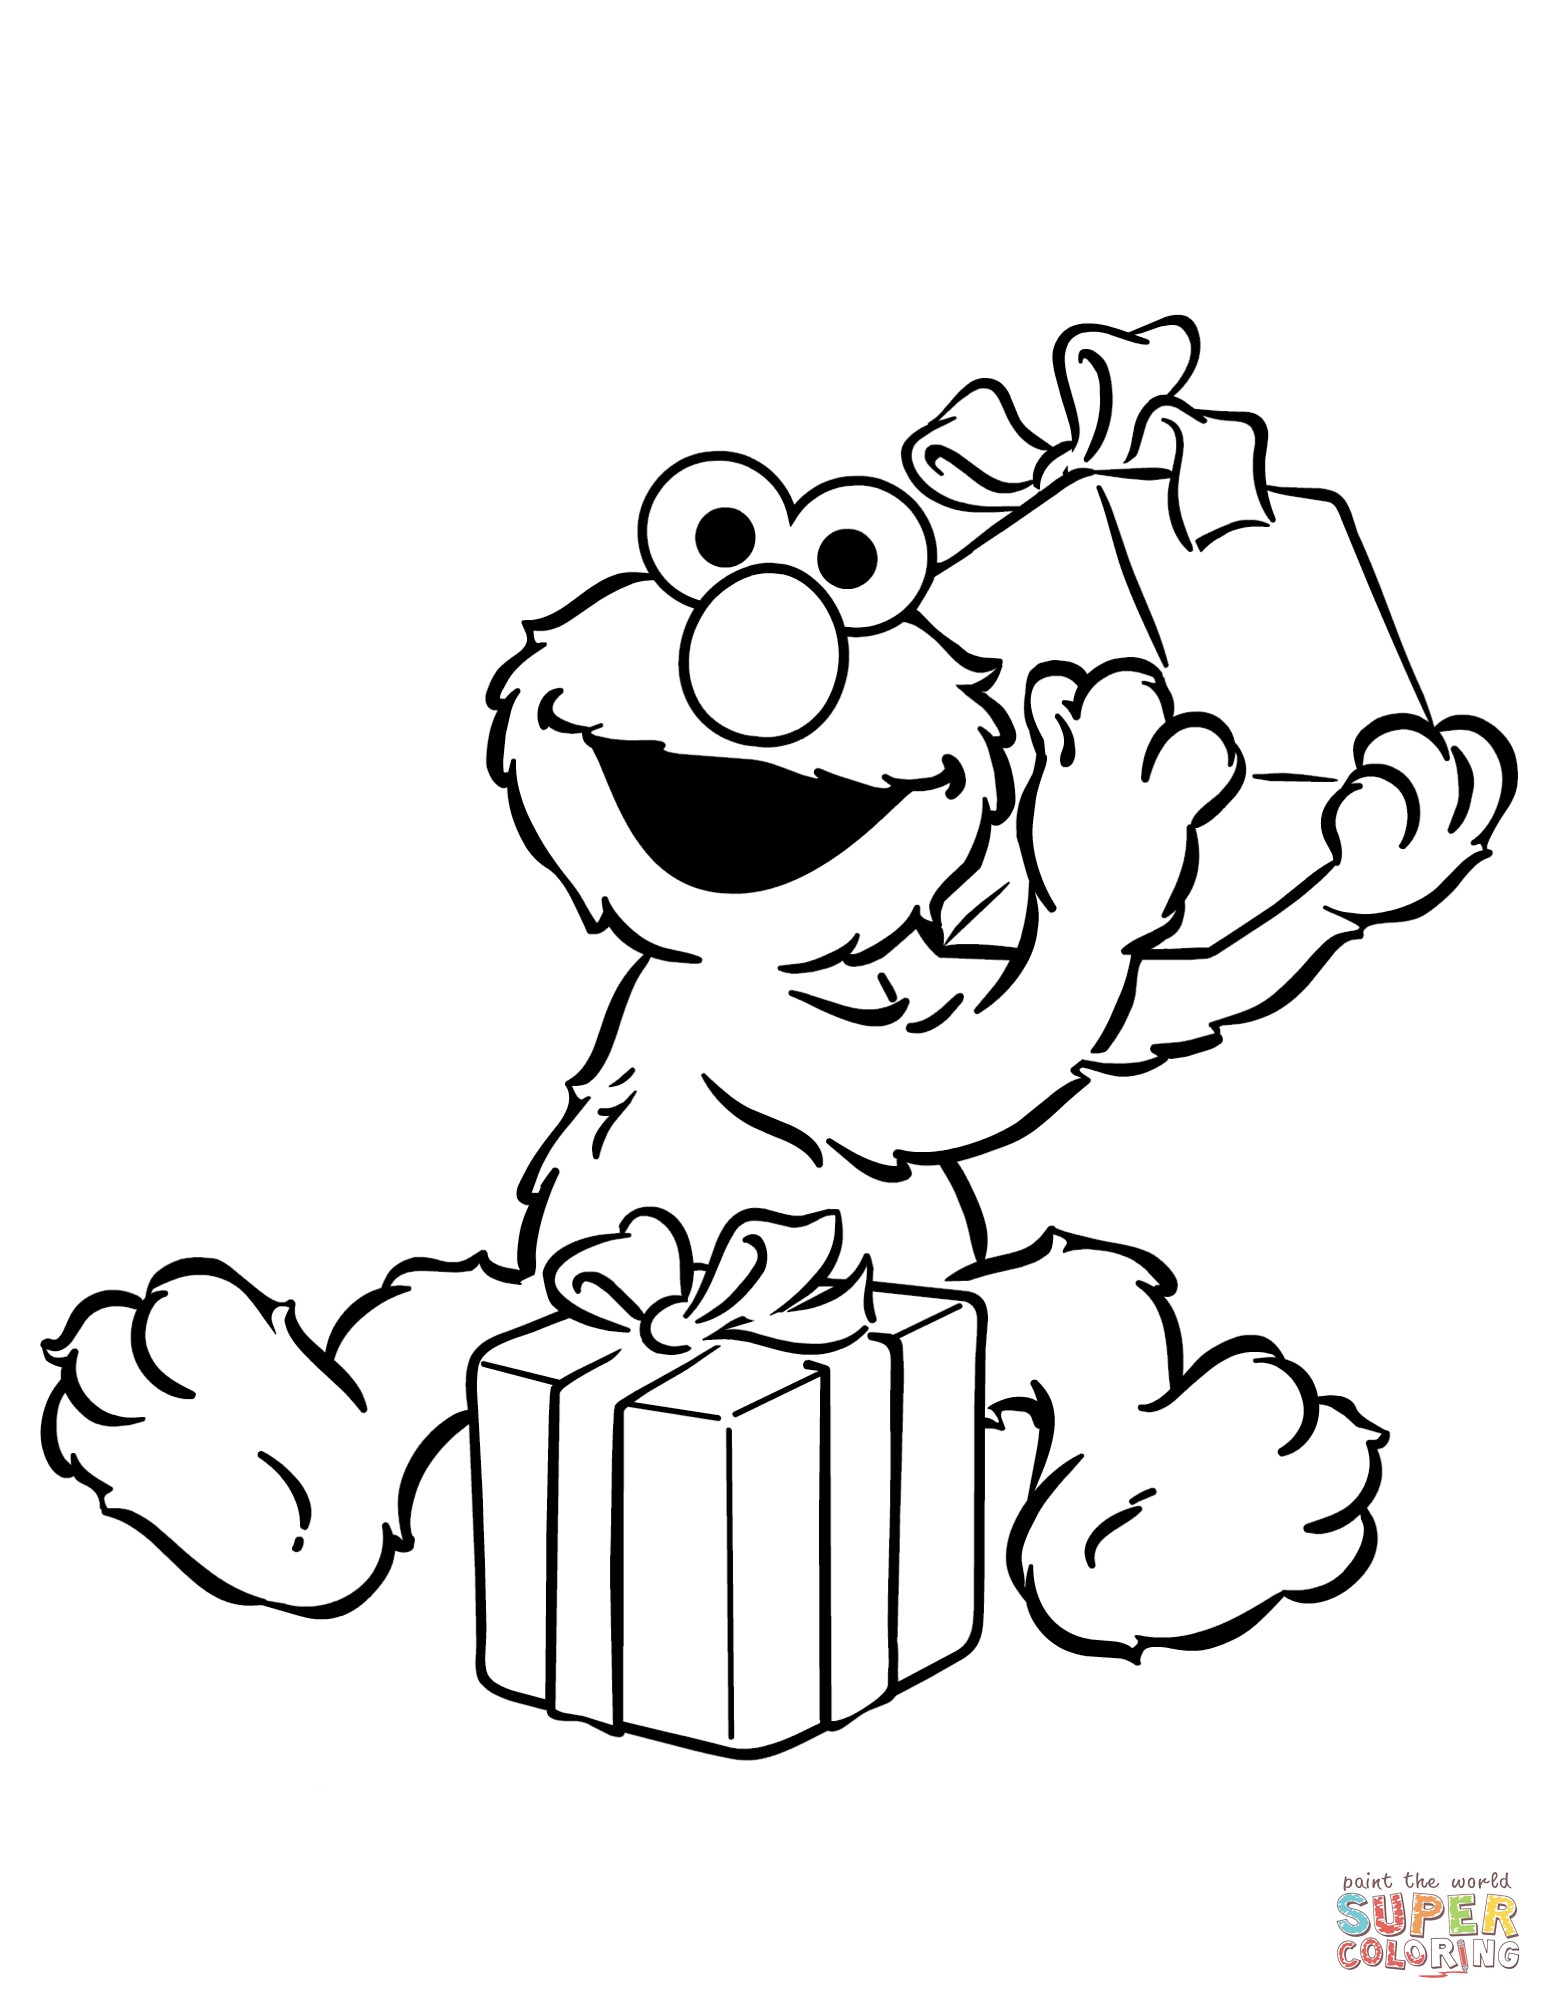 Elmo opening birthday presents coloring page free printable coloring pages